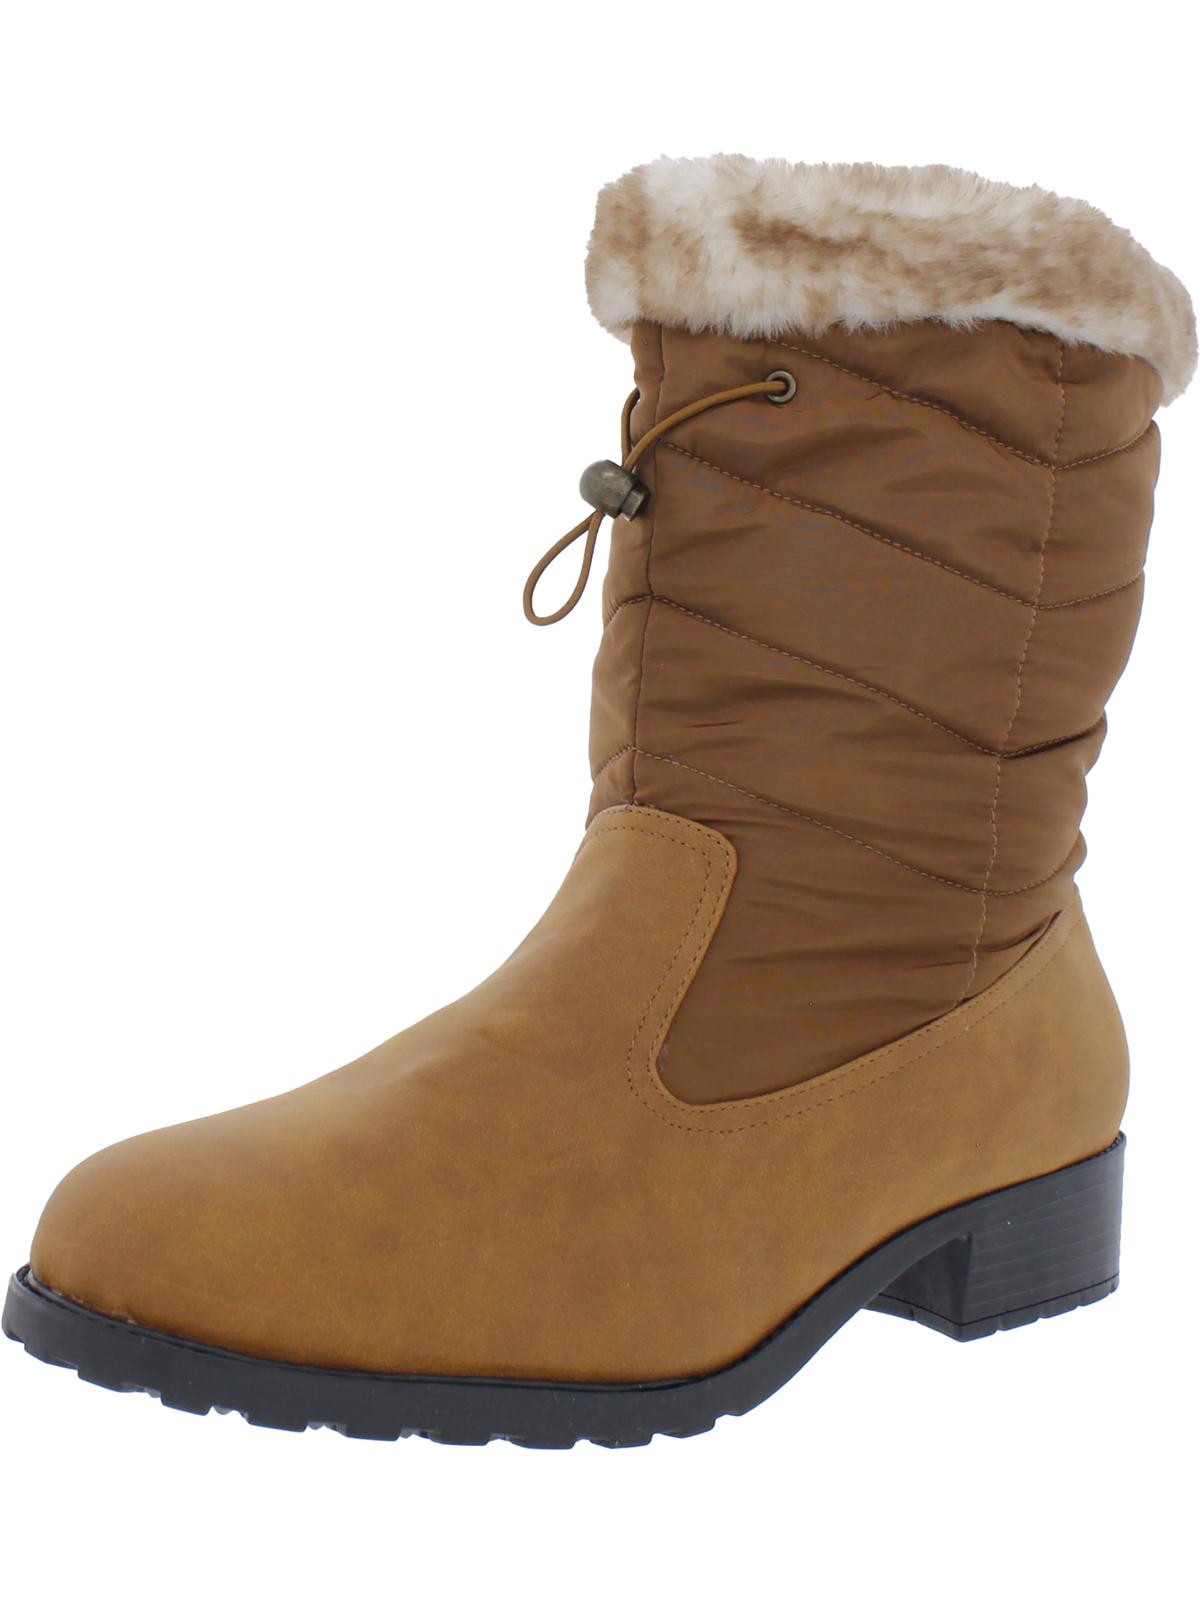 TROTTERS Bryce Womens Faux Fur Lined Zipper Mid-Calf Boots